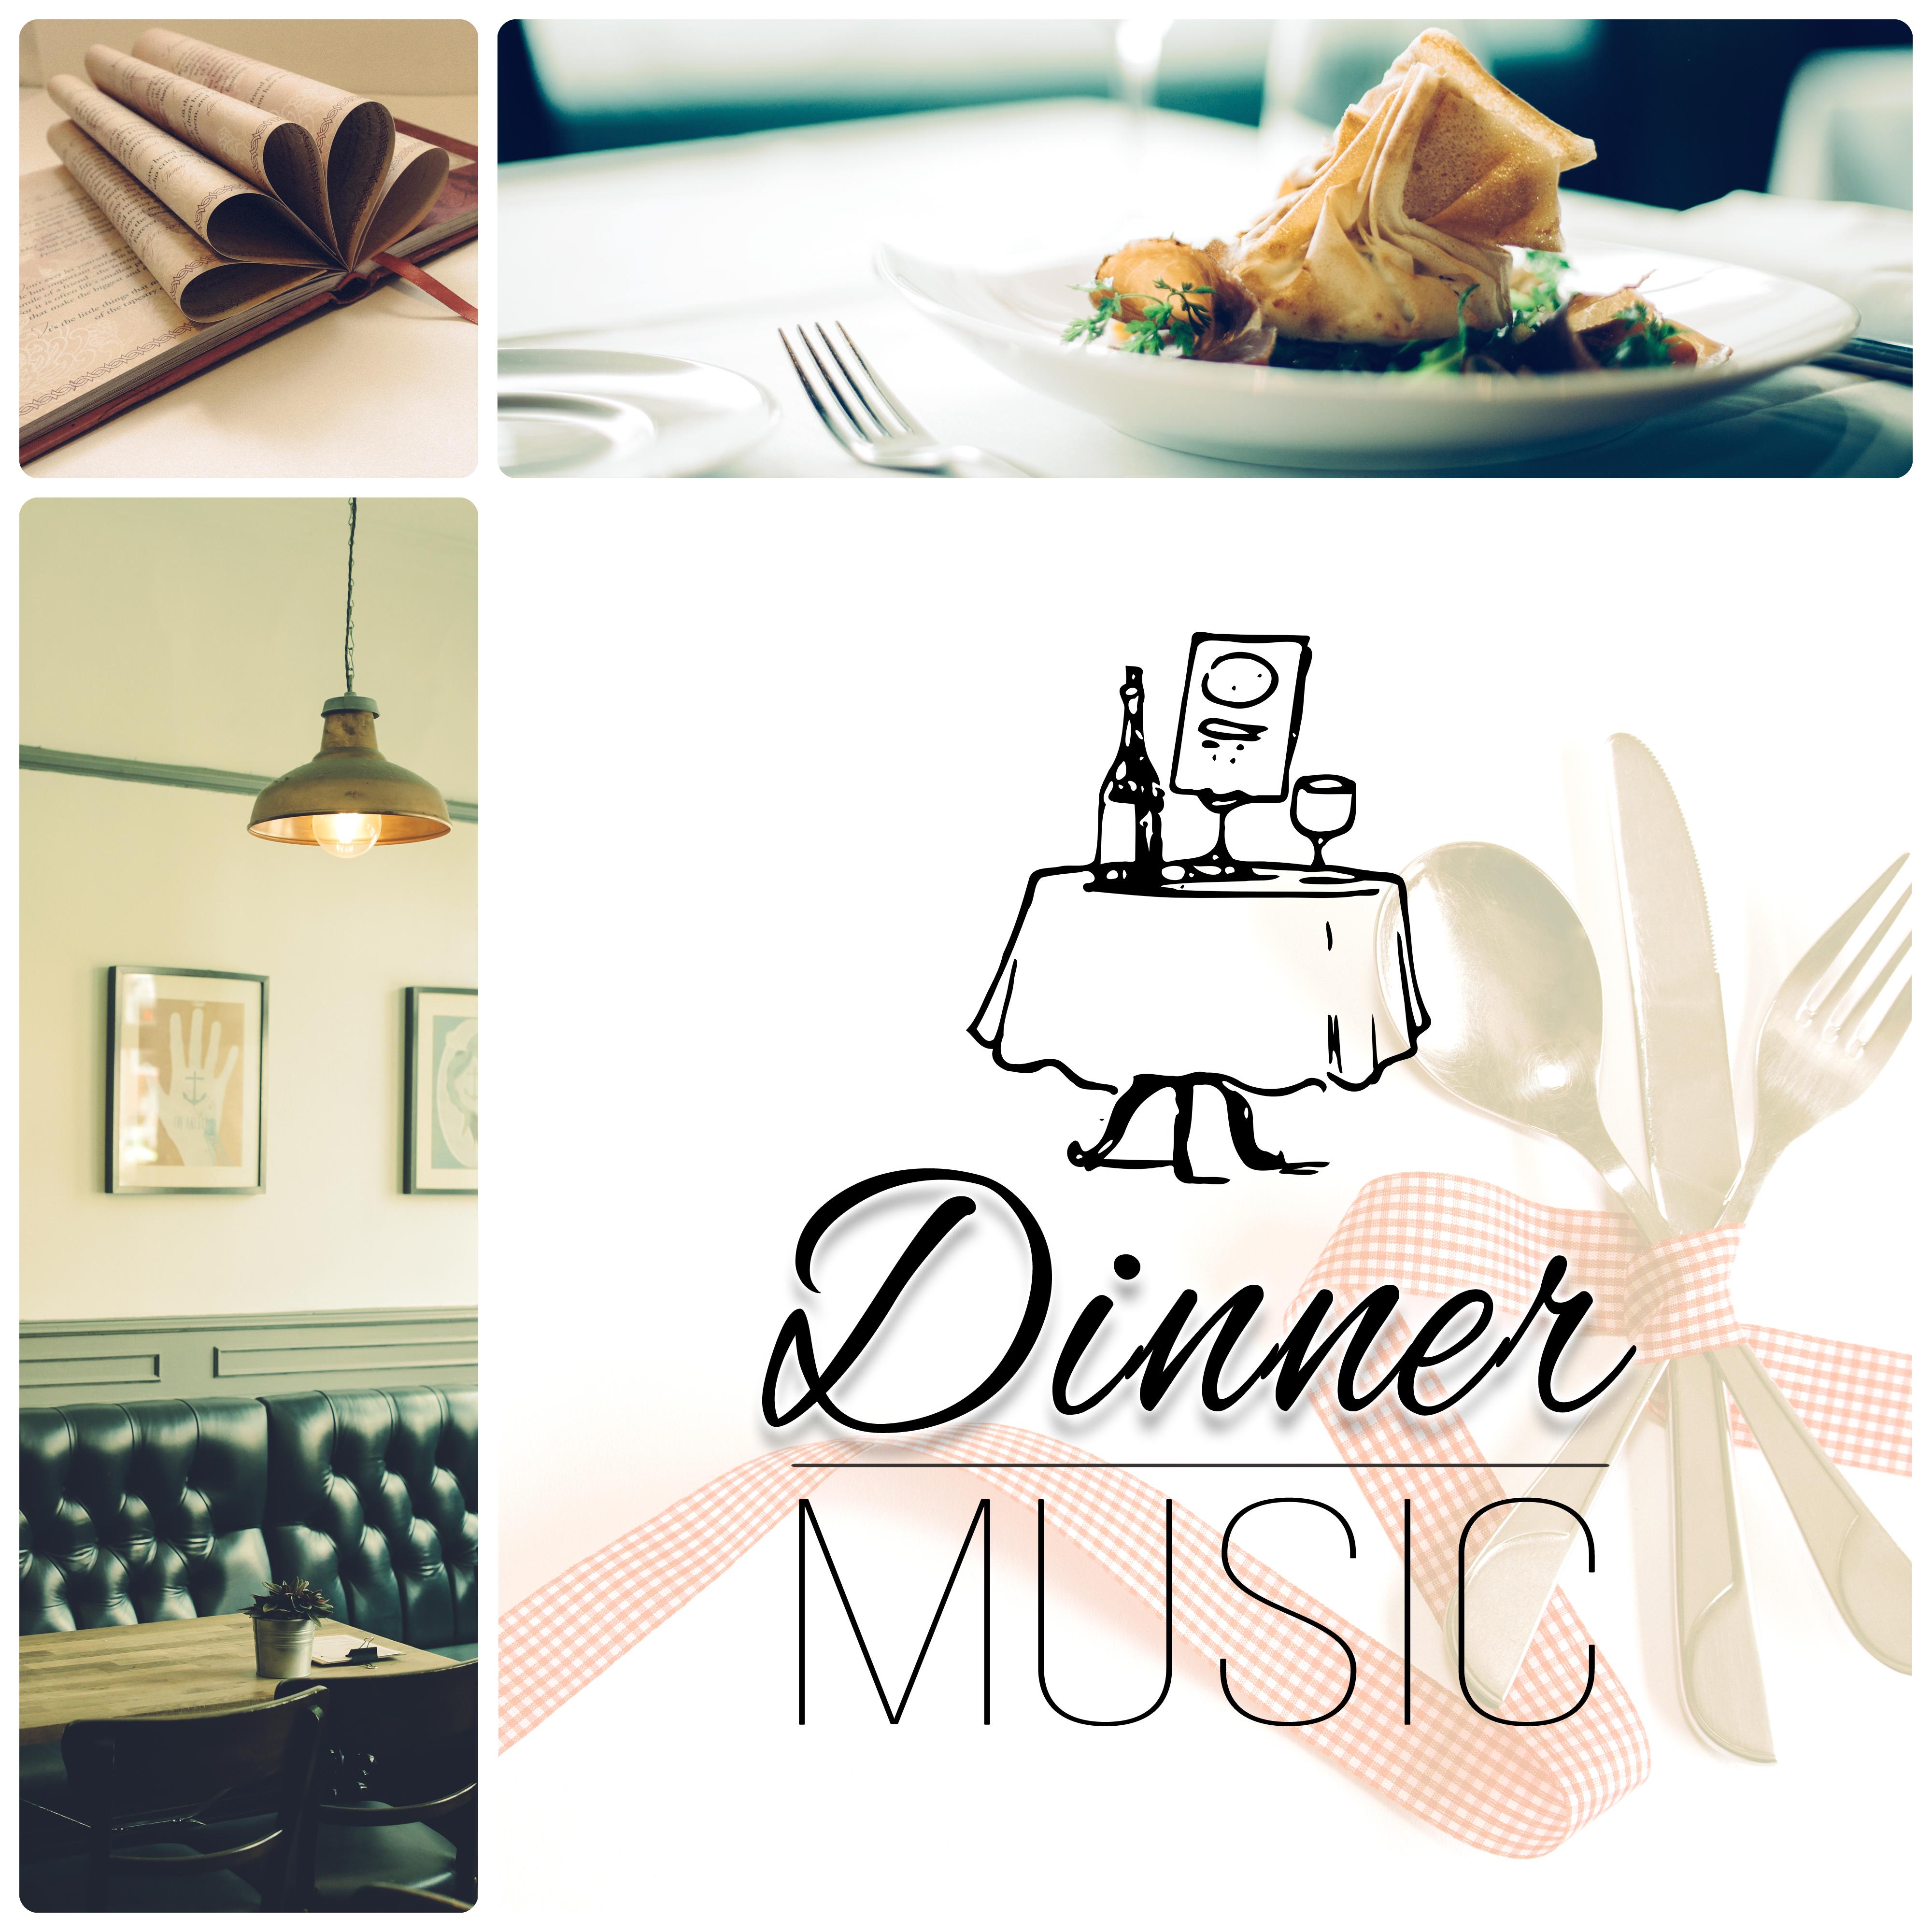 Dinner Music - Background Music for Relax, Jazz for Sleep, Romantic Dinner Party Music, Cool Jazz